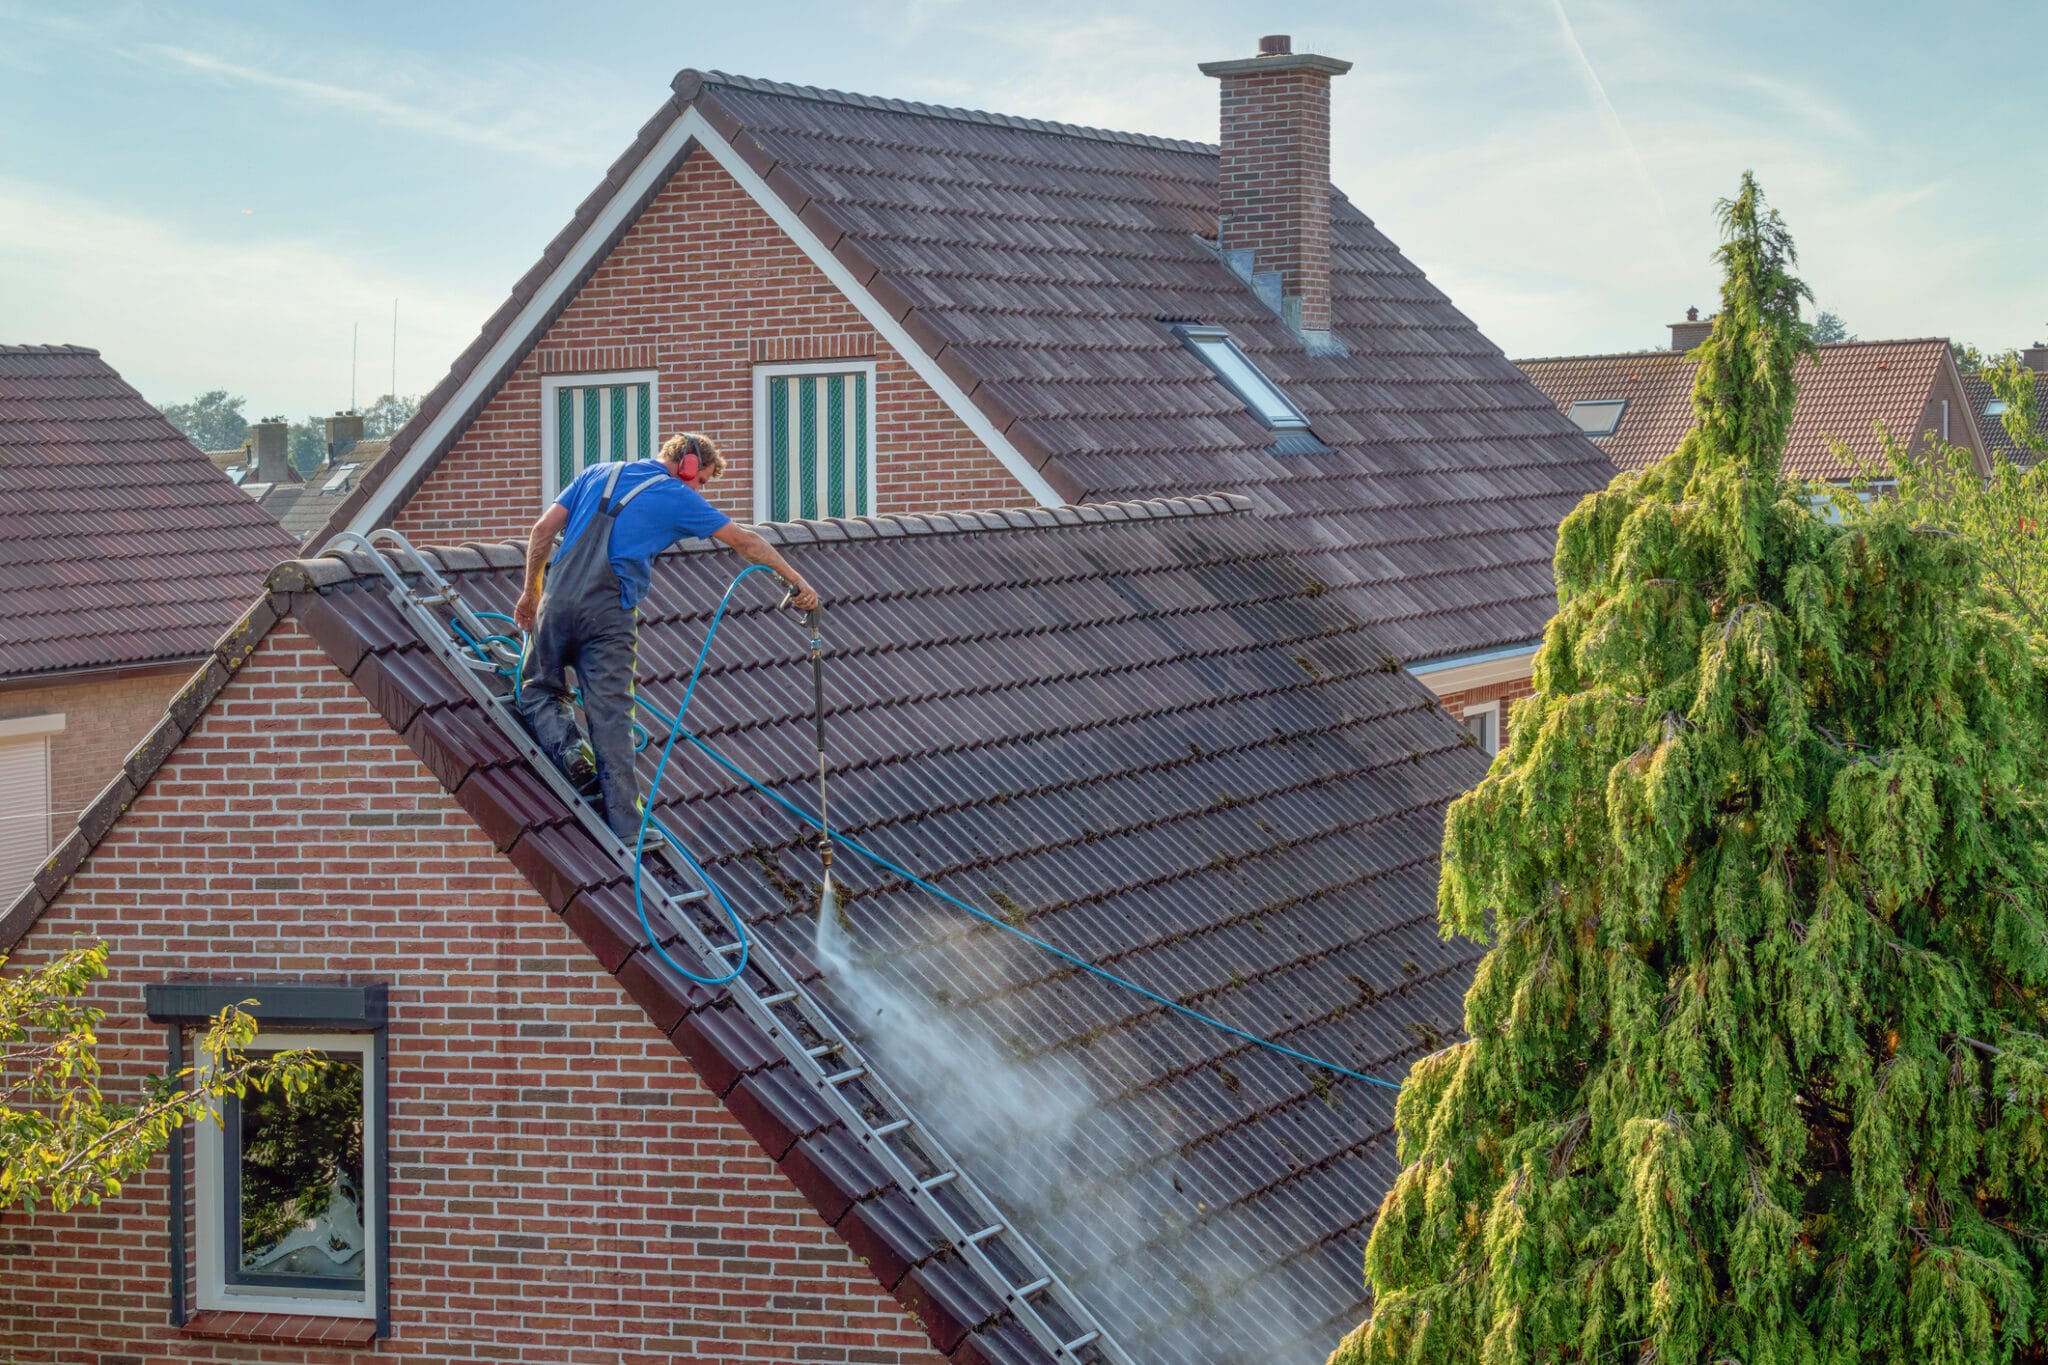 Cleaner with pressure washer at roof house cleaning roof tiles